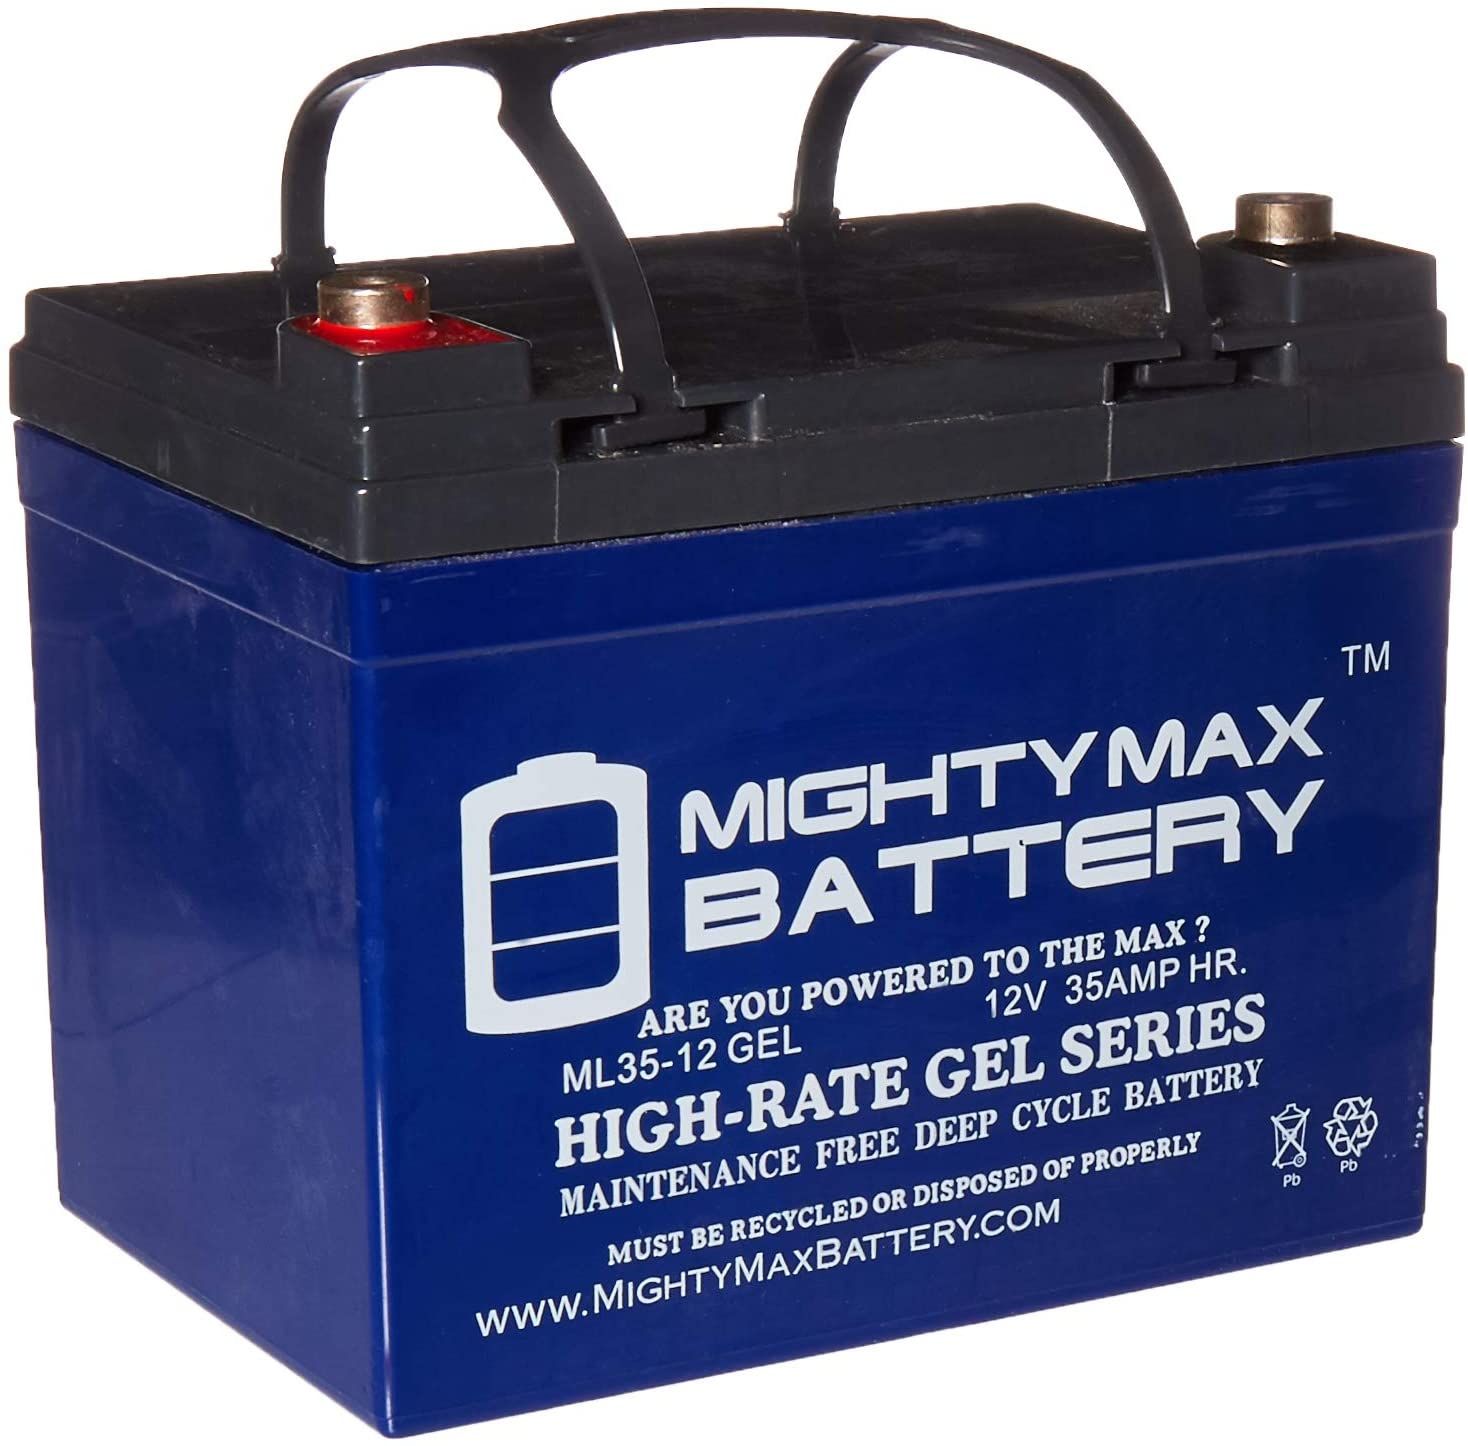 10 Best Car Batteries of 2021 ReviewThis